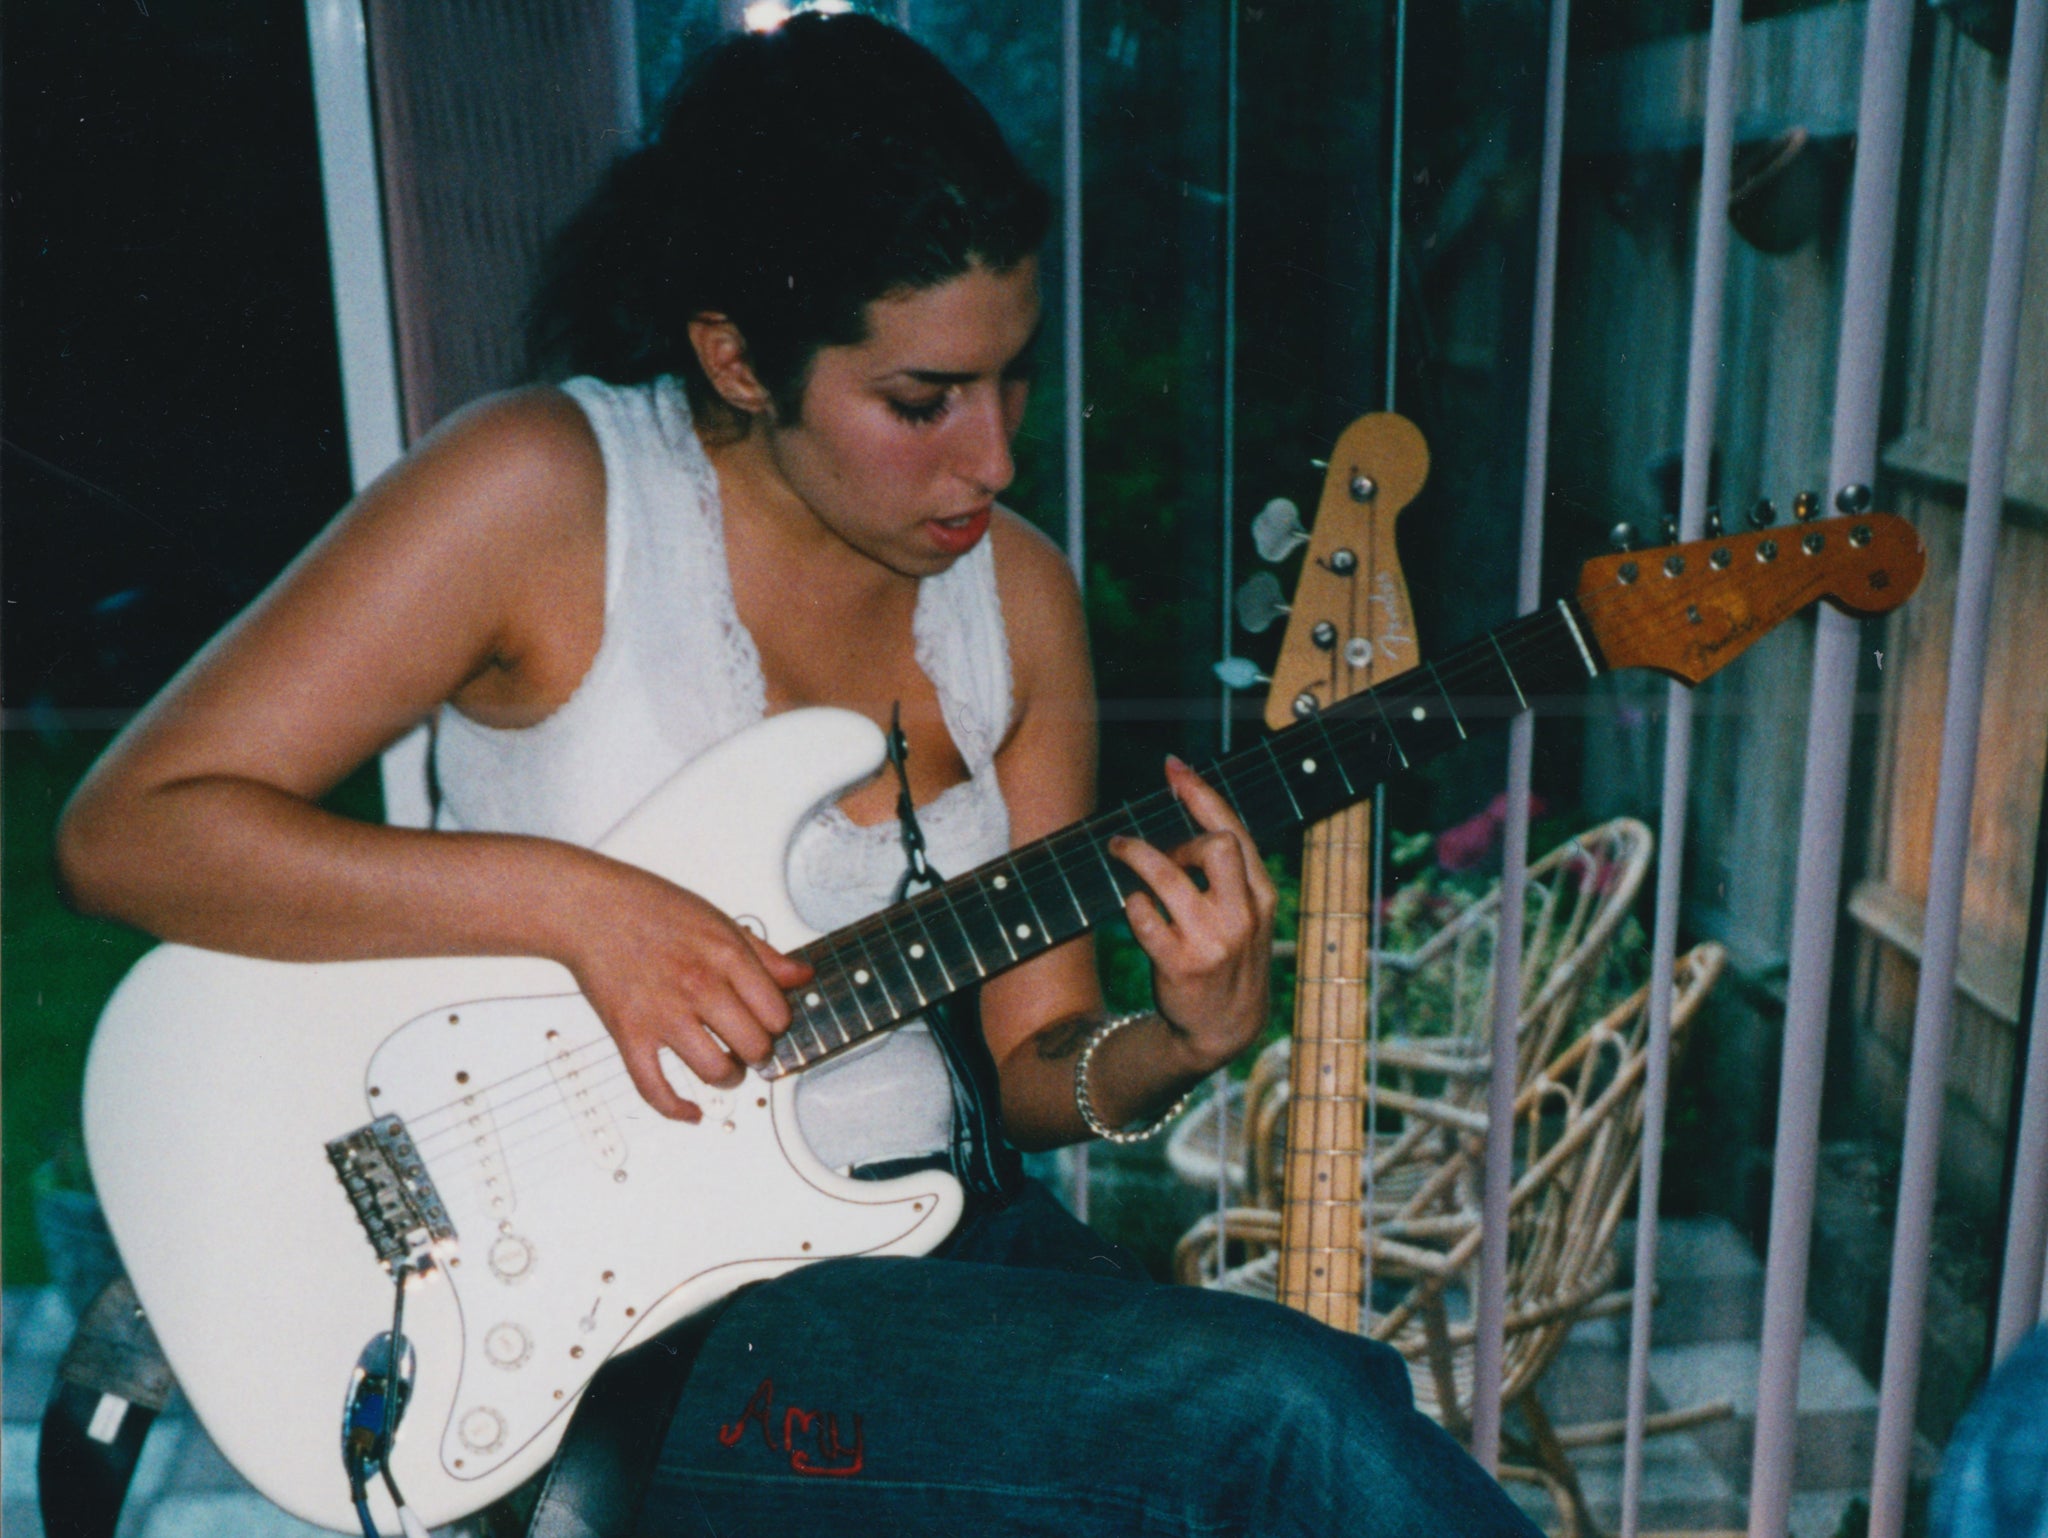 Amy Winehouse as a young girl pictures playing the guitar at home in north London